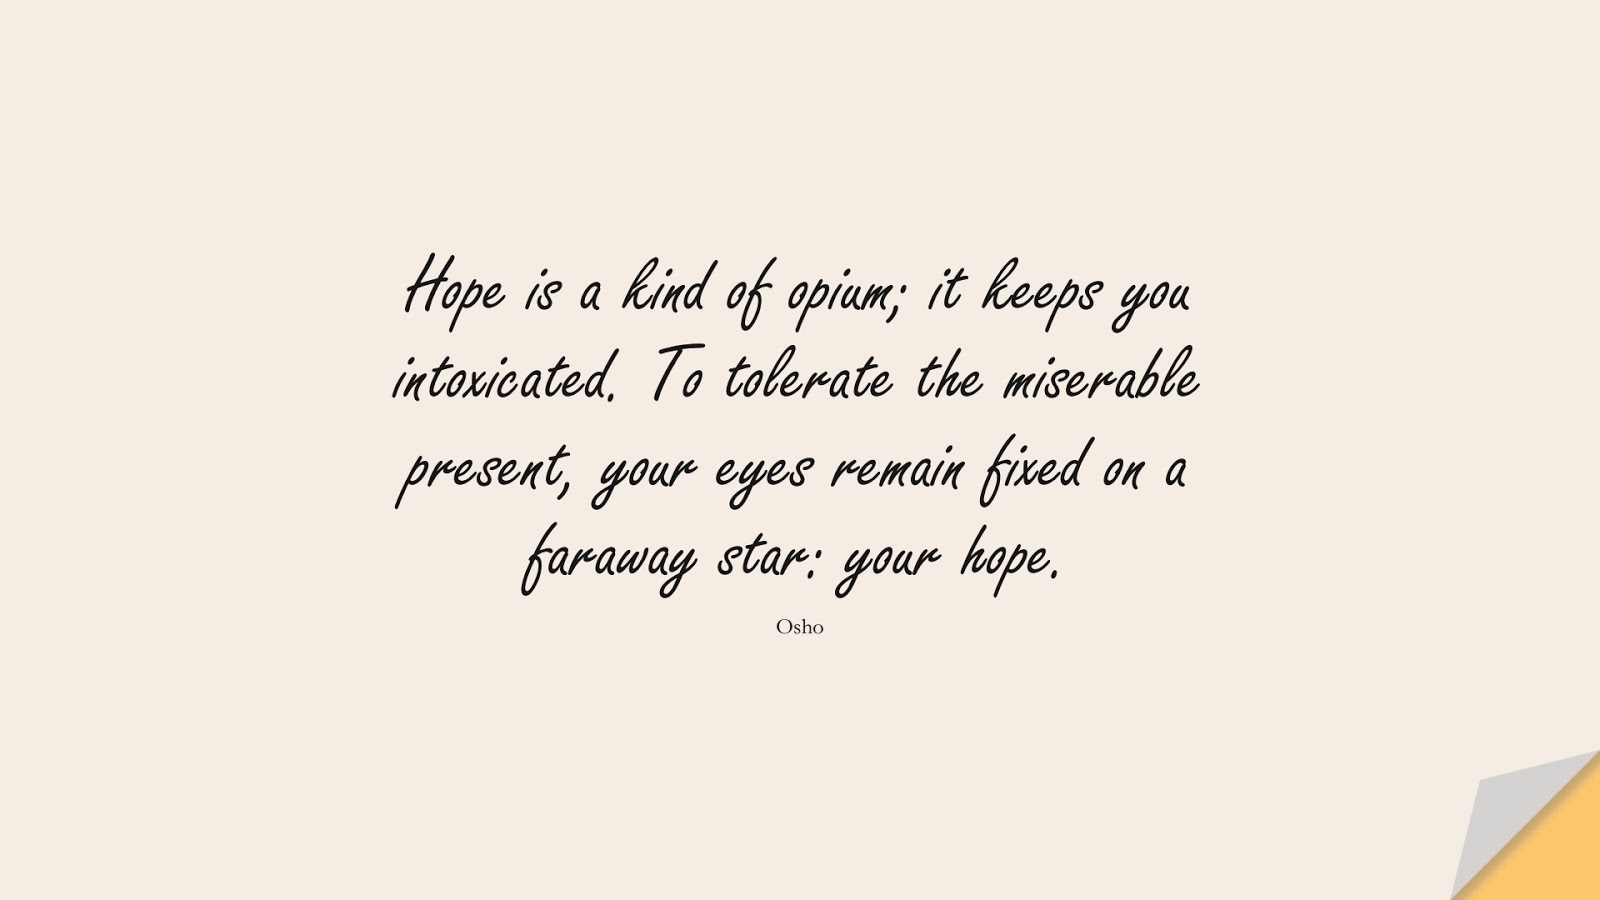 Hope is a kind of opium; it keeps you intoxicated. To tolerate the miserable present, your eyes remain fixed on a faraway star: your hope. (Osho);  #AnxietyQuotes